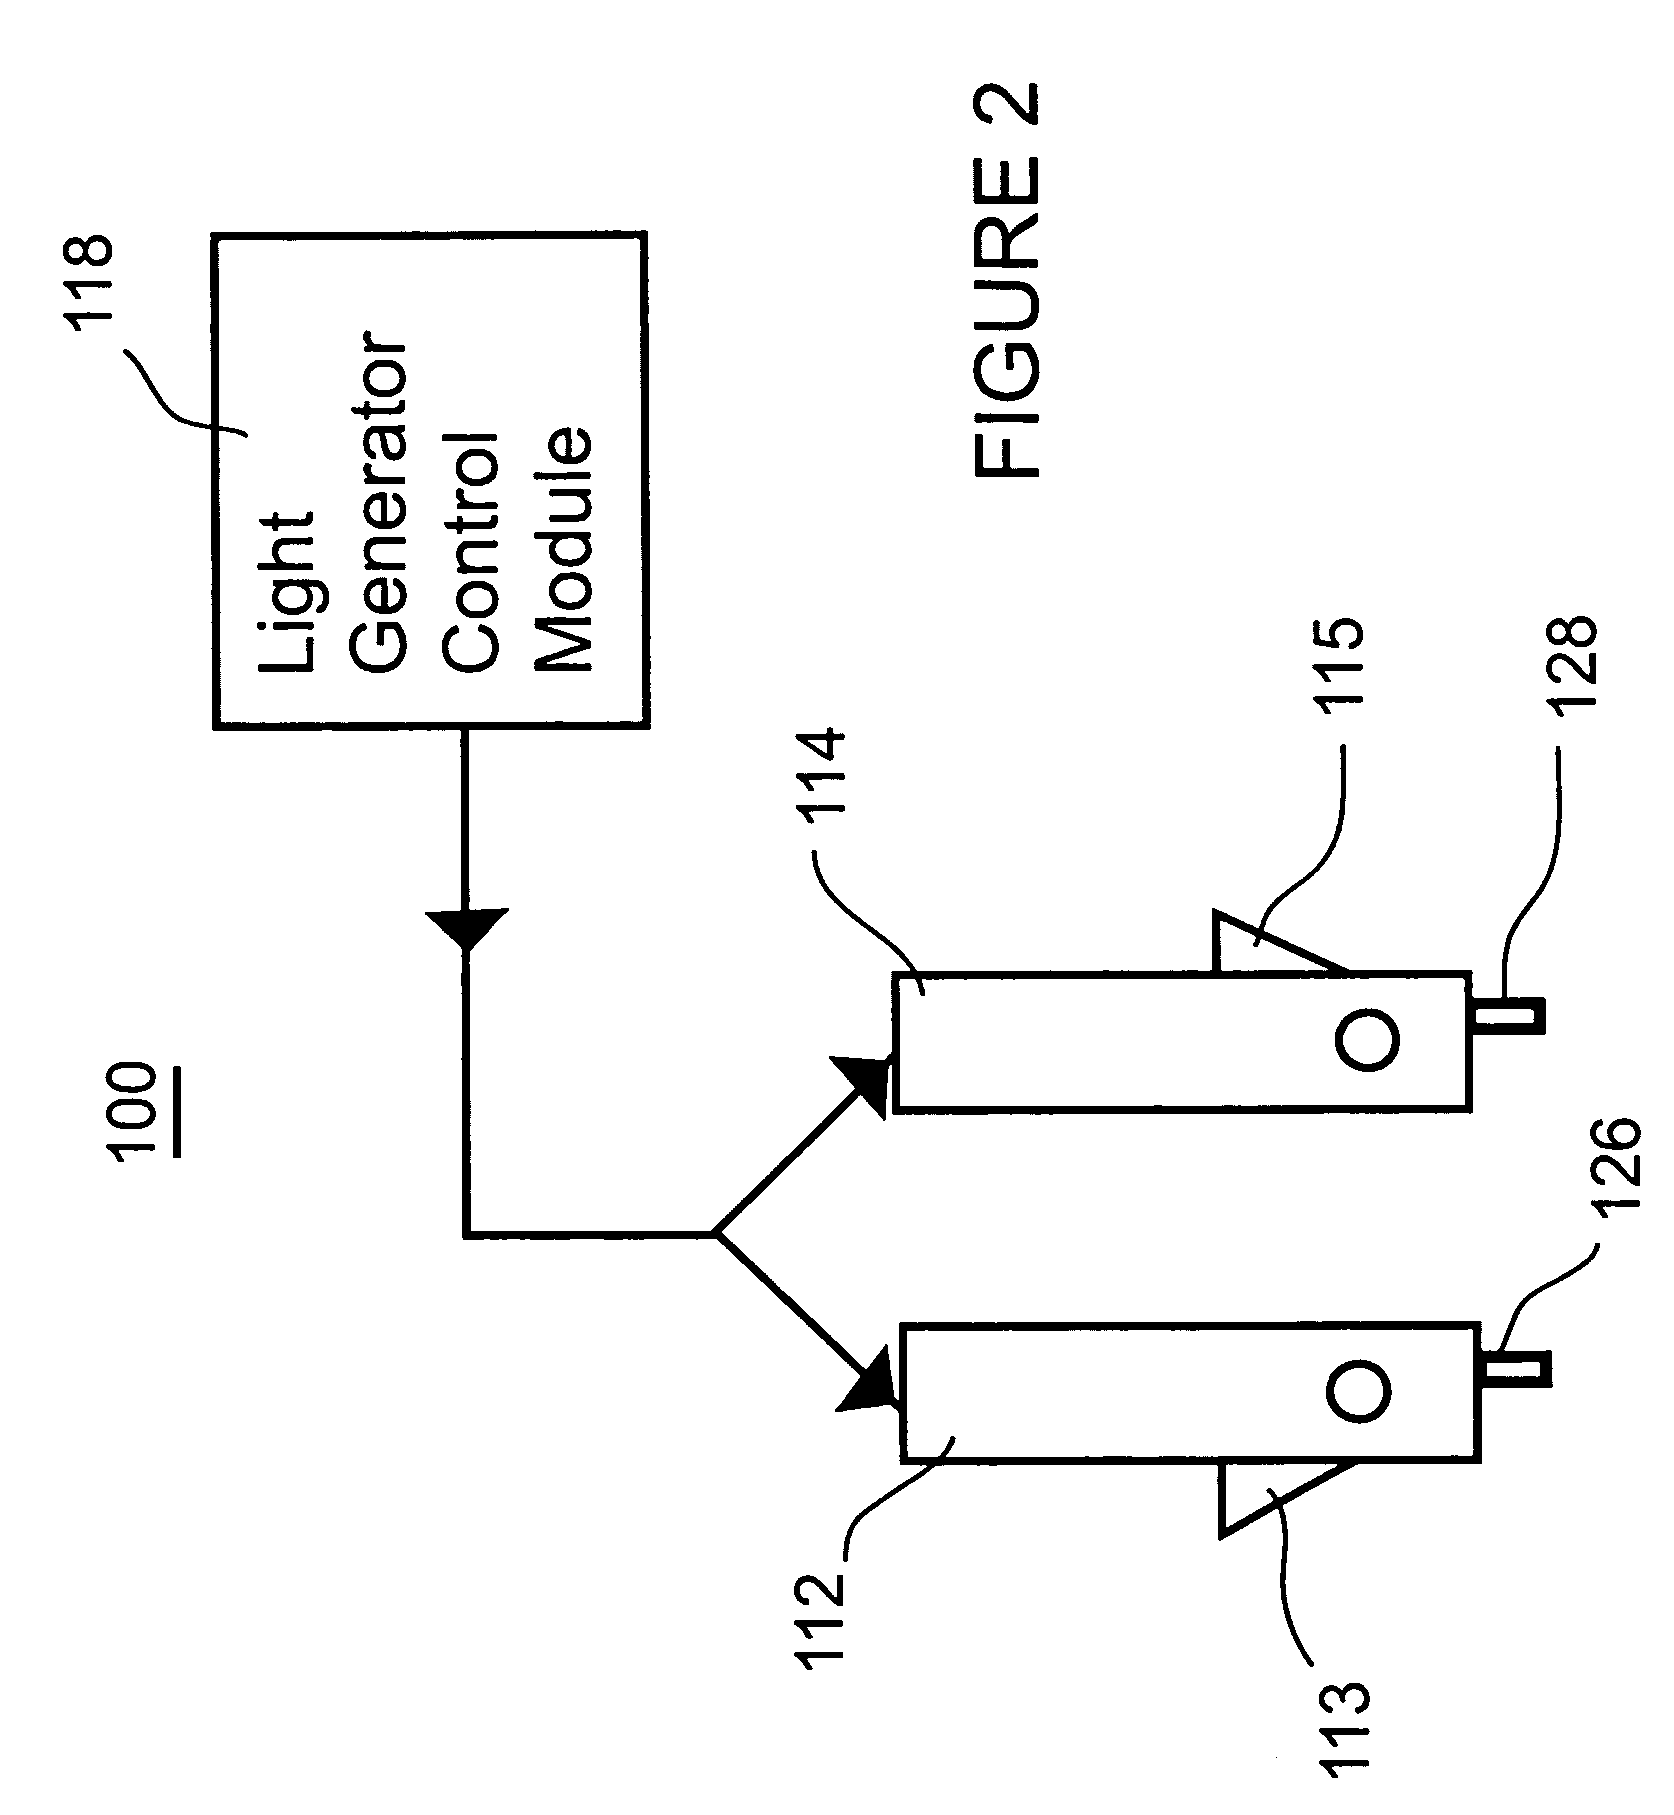 Light/electric probe system and method